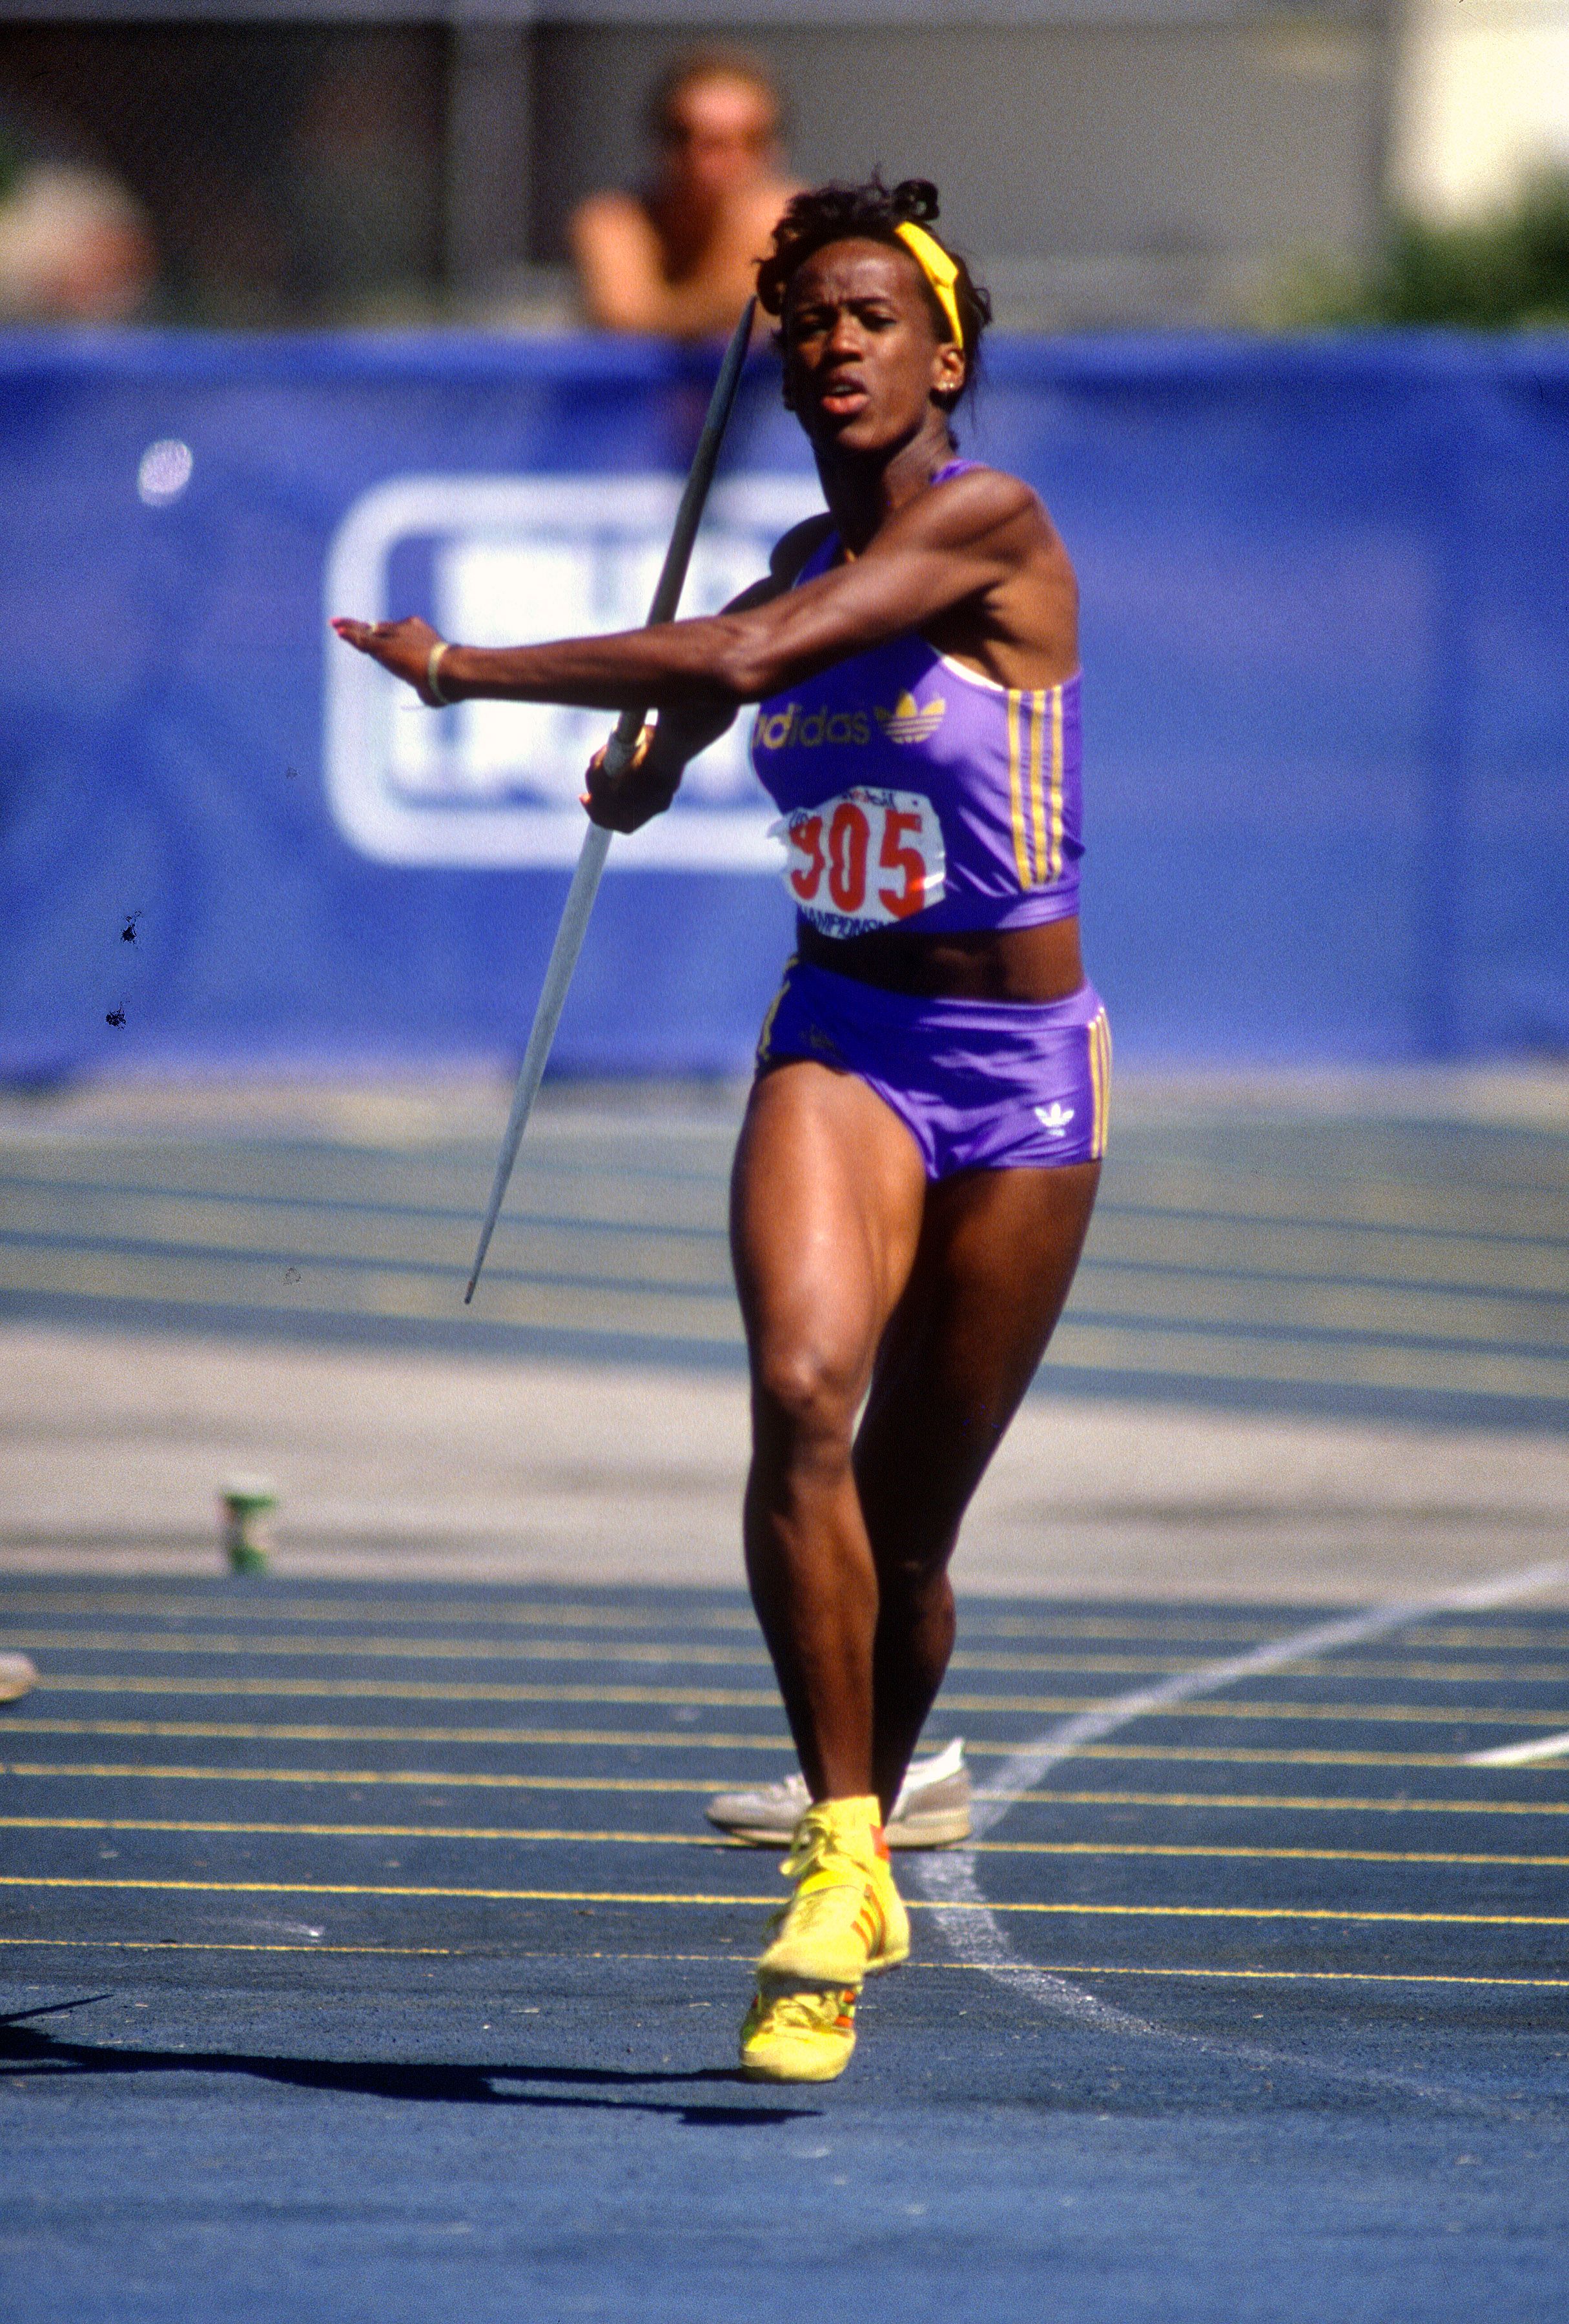 Jackie Joyner-Kersee competing in the javelin throw at a track and field event circa 1987. [Month and day of the month unspecified].  | Photo: Getty Images